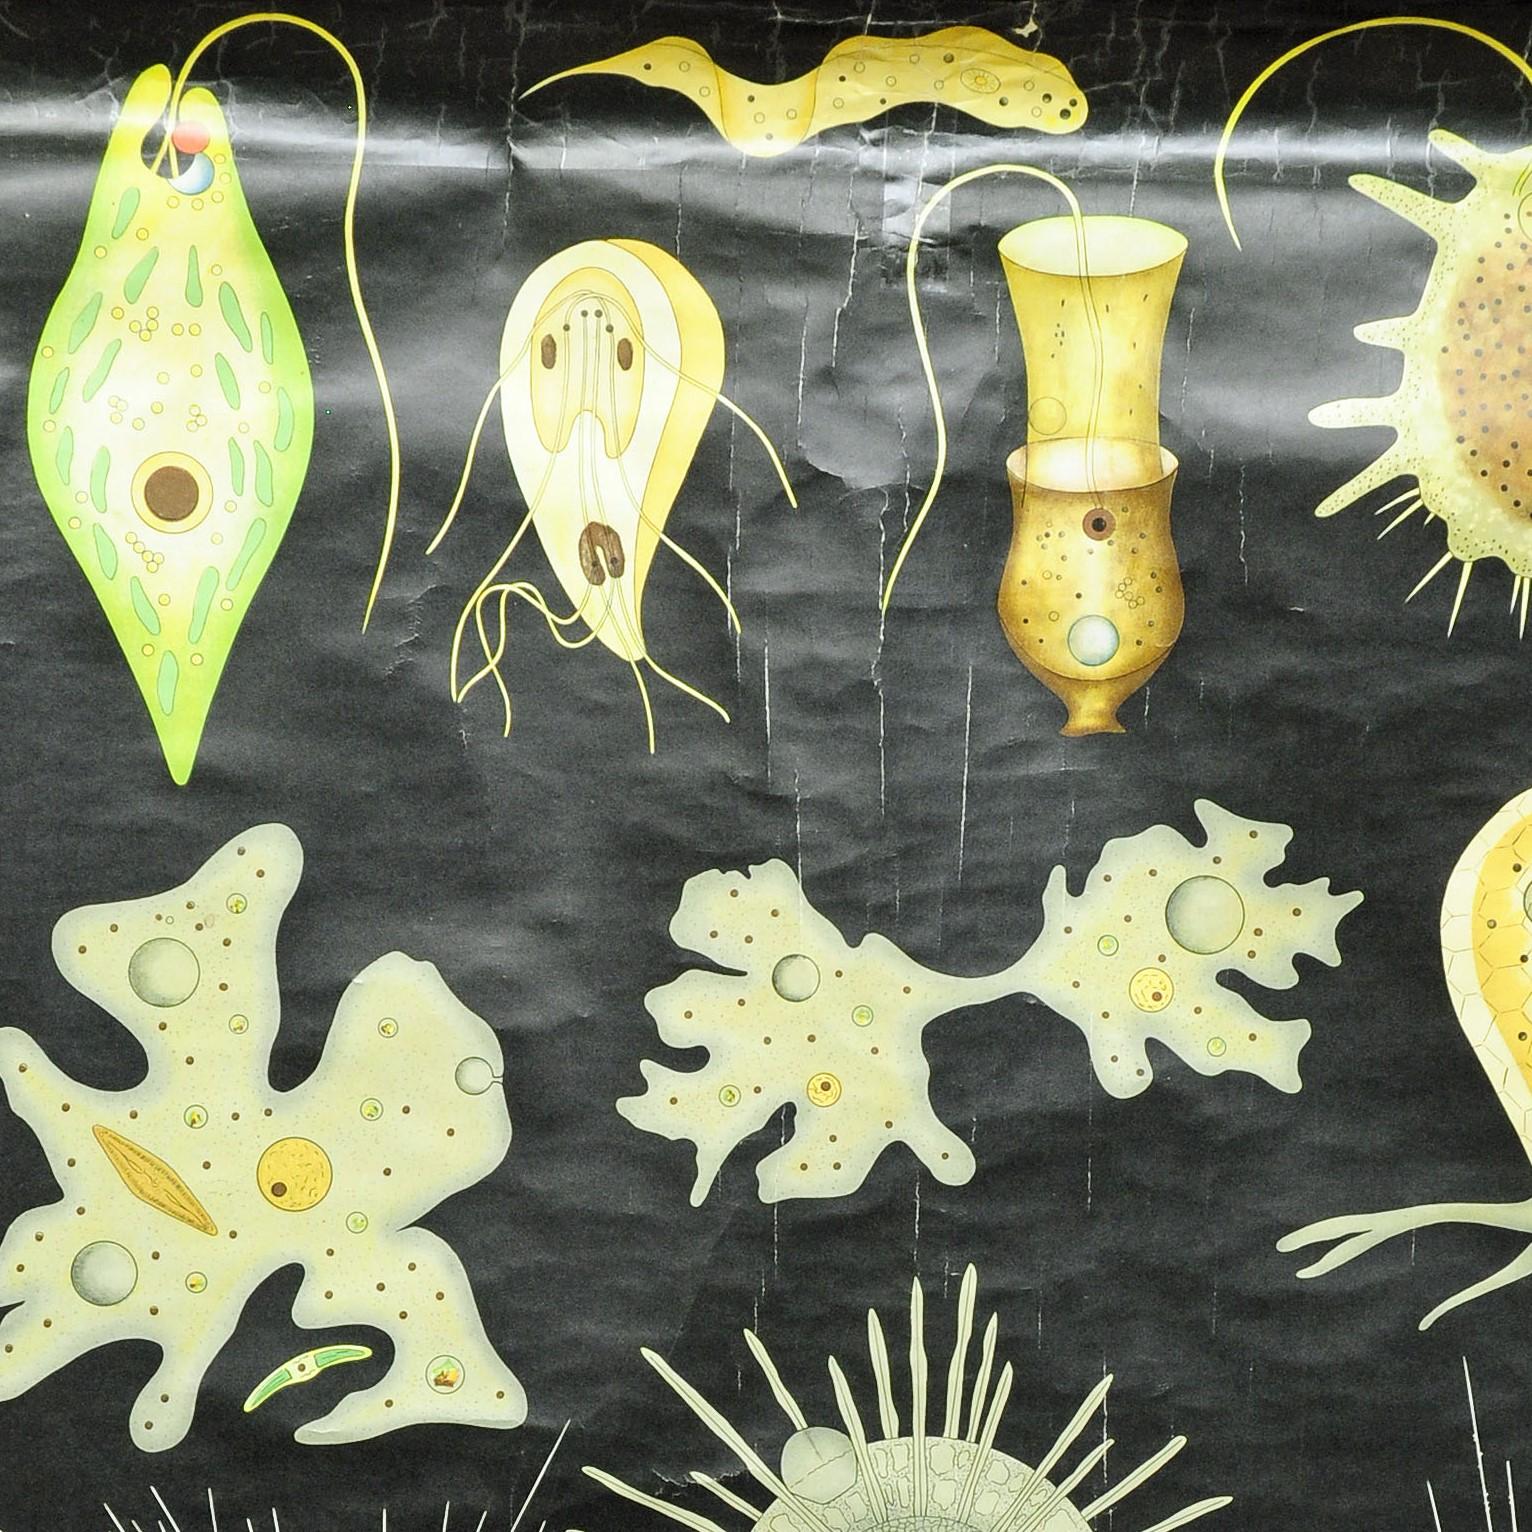 A classical pull-down Jung Koch Quentell wall chart depicting flagellates and rhizopod. Used as teaching material in German schools. Colorful print on paper reinforced with canvas. Published by Lehrmittelverlag Wilhelm Hagemann, Duesseldorf.